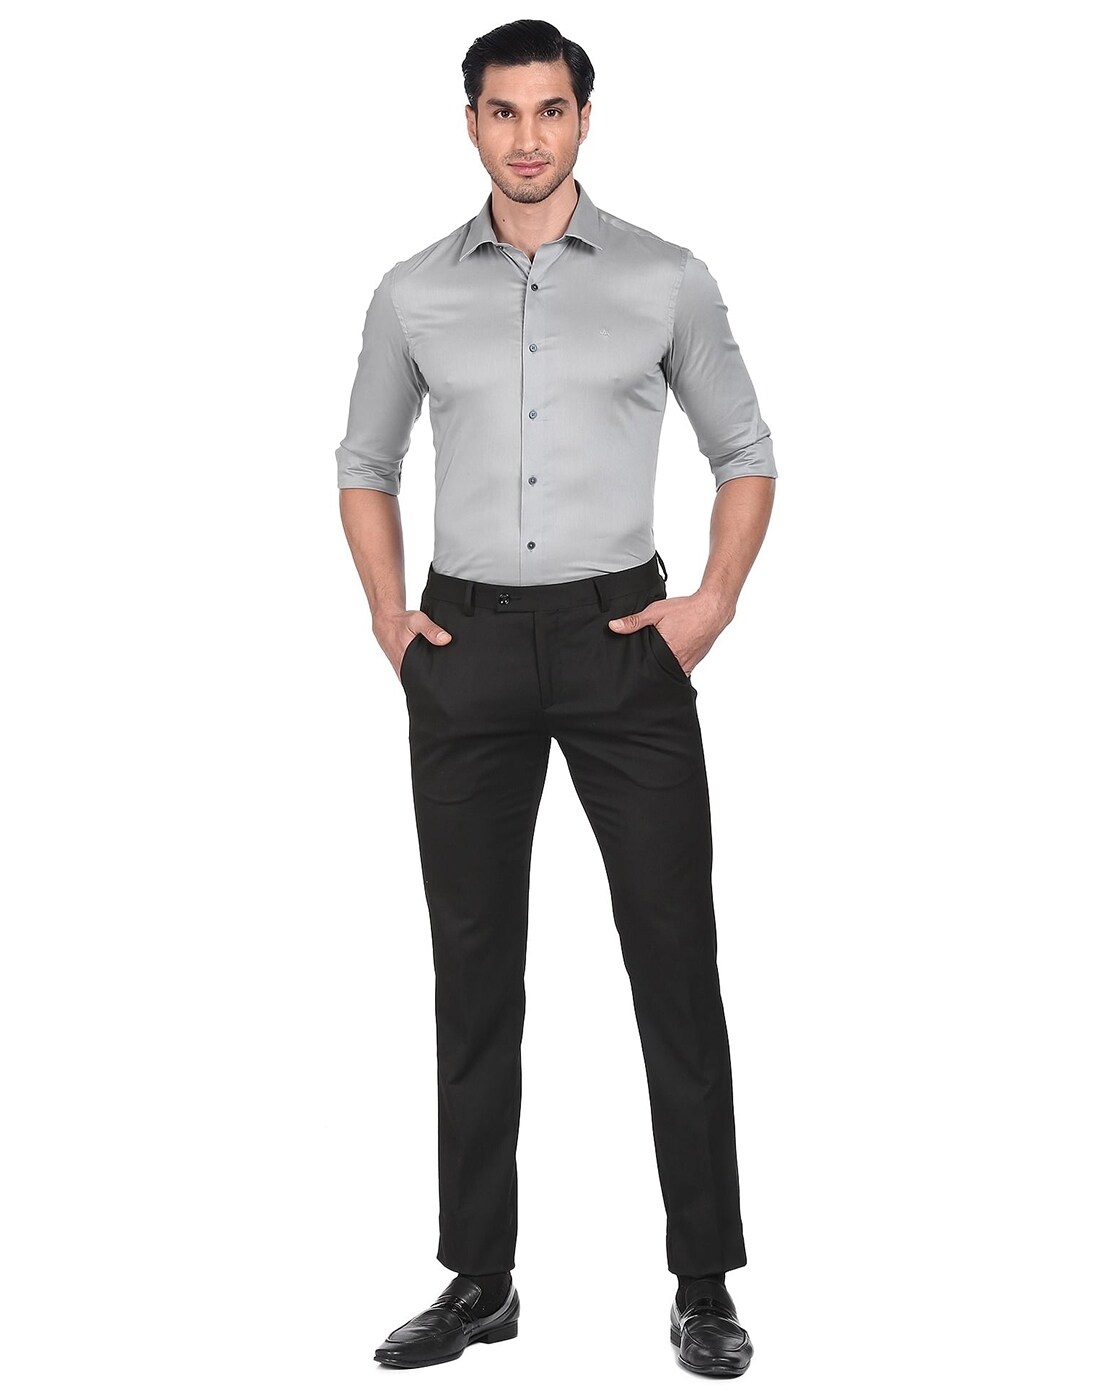 What to Wear With Grey Pants | Short sleeve dress shirt men, Black shirt  outfits, Grey pants outfit